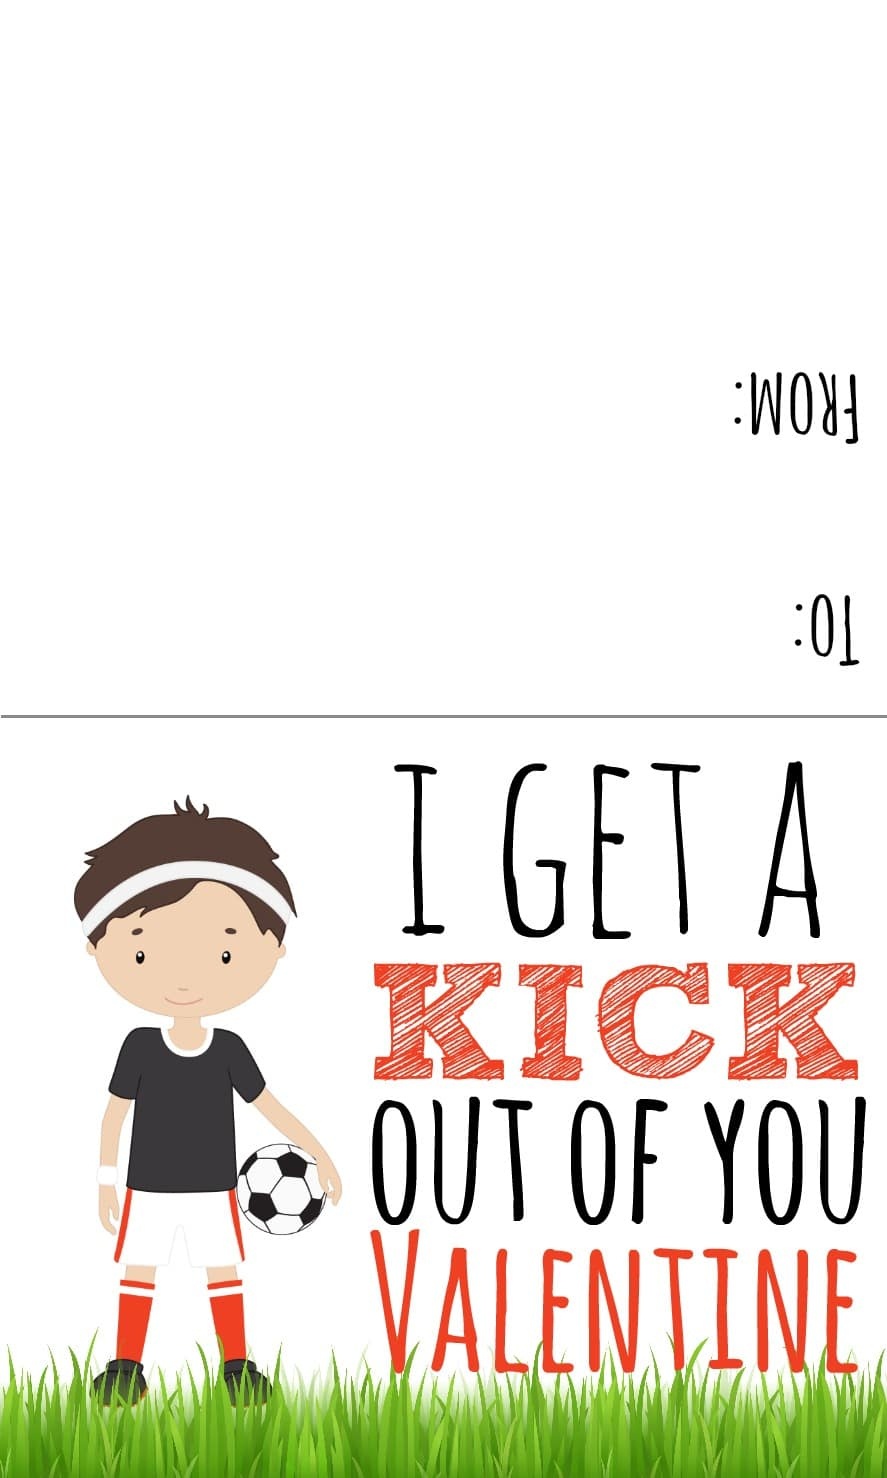 Sports Valentines Printables - Candy Free Valentine Ideas - Free Printable Football Valentines Day Cards